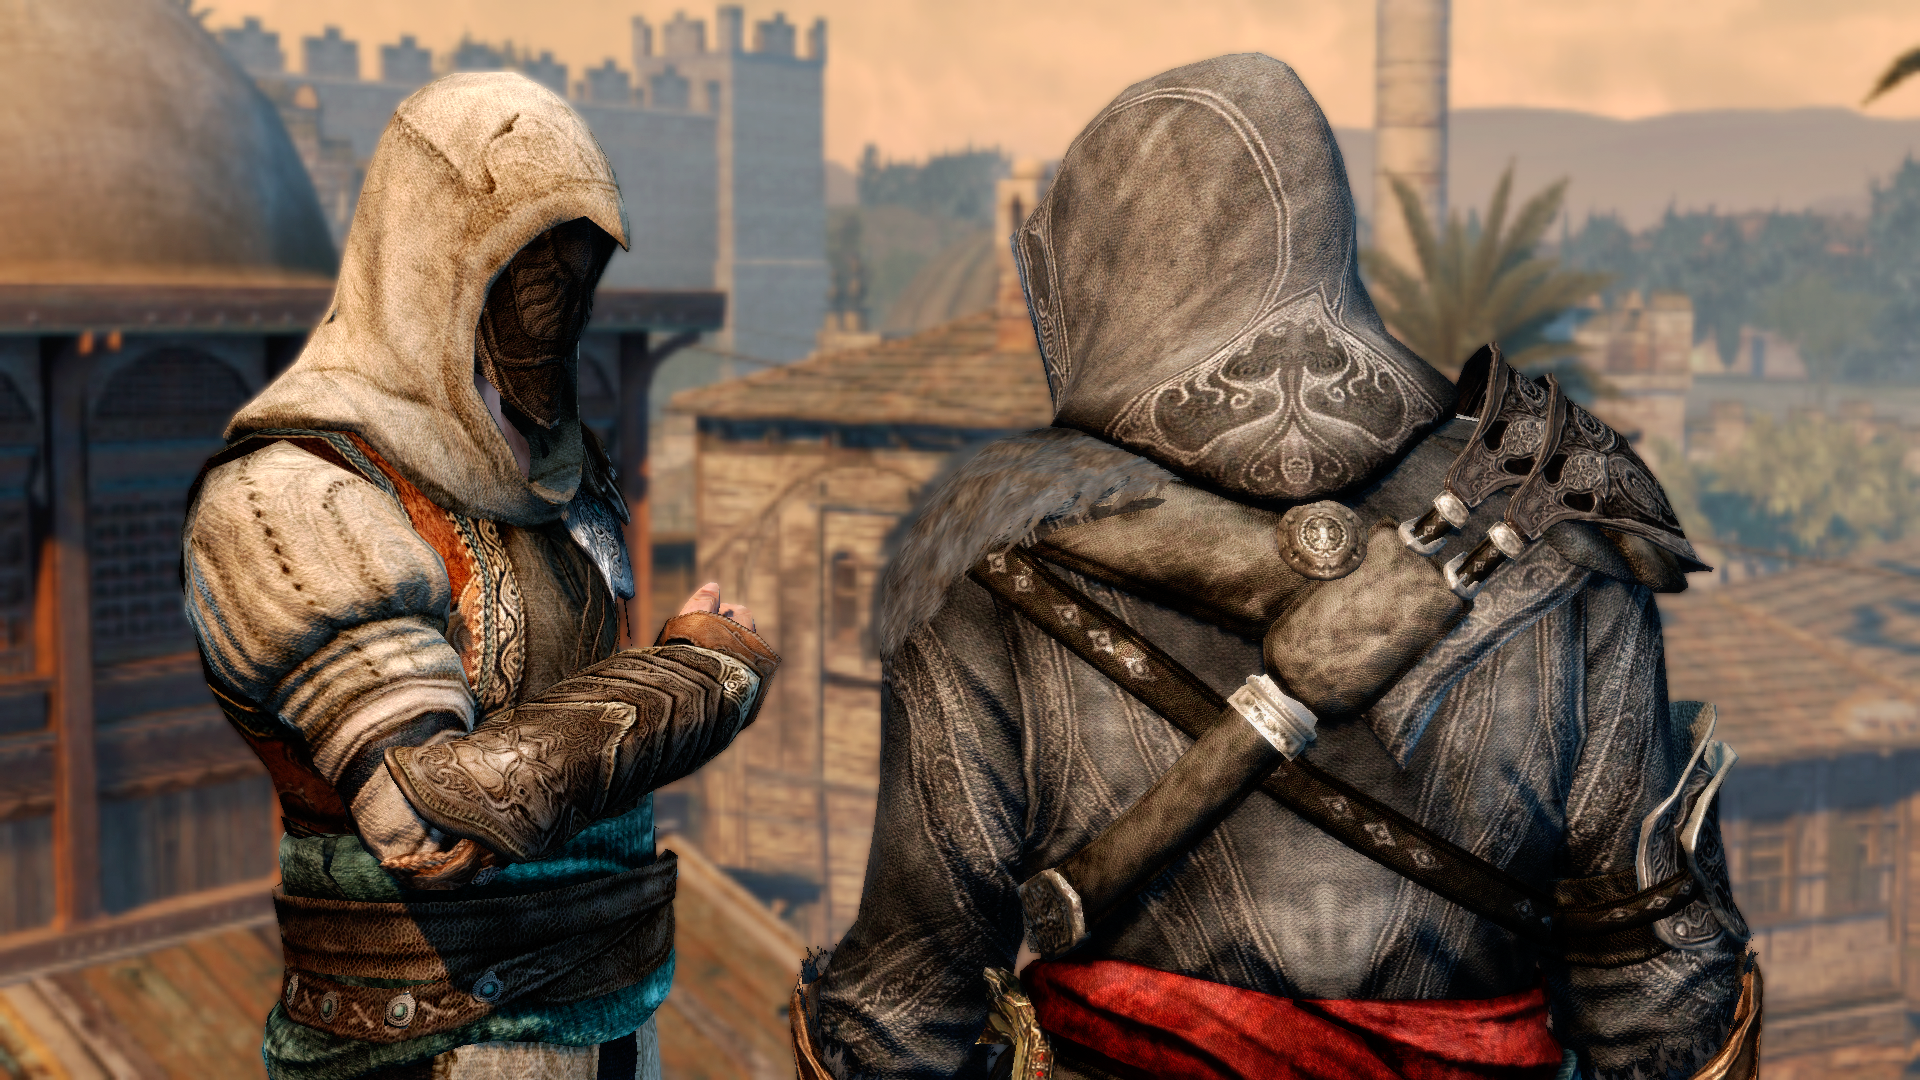 General 1920x1080 Assassin's Creed: Revelations video games Ezio Auditore da Firenze Ubisoft Istanbul video game characters